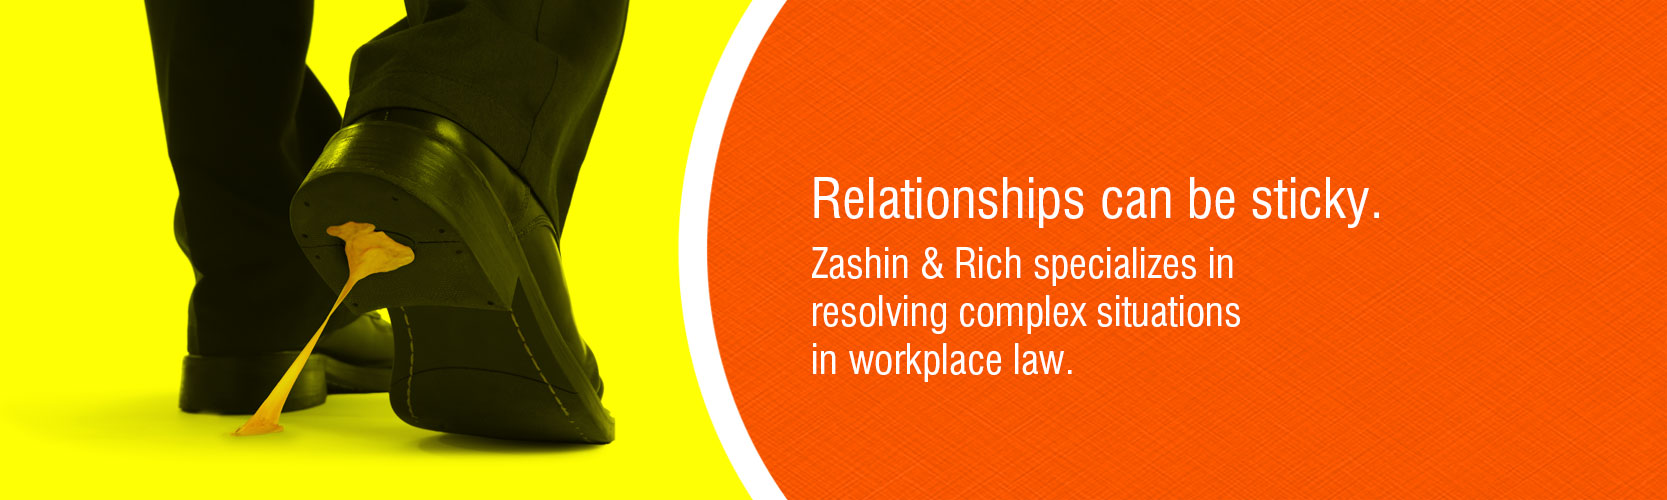 Relationships can be sticky. We specialize in resolving complex situations in workplace law and family law.